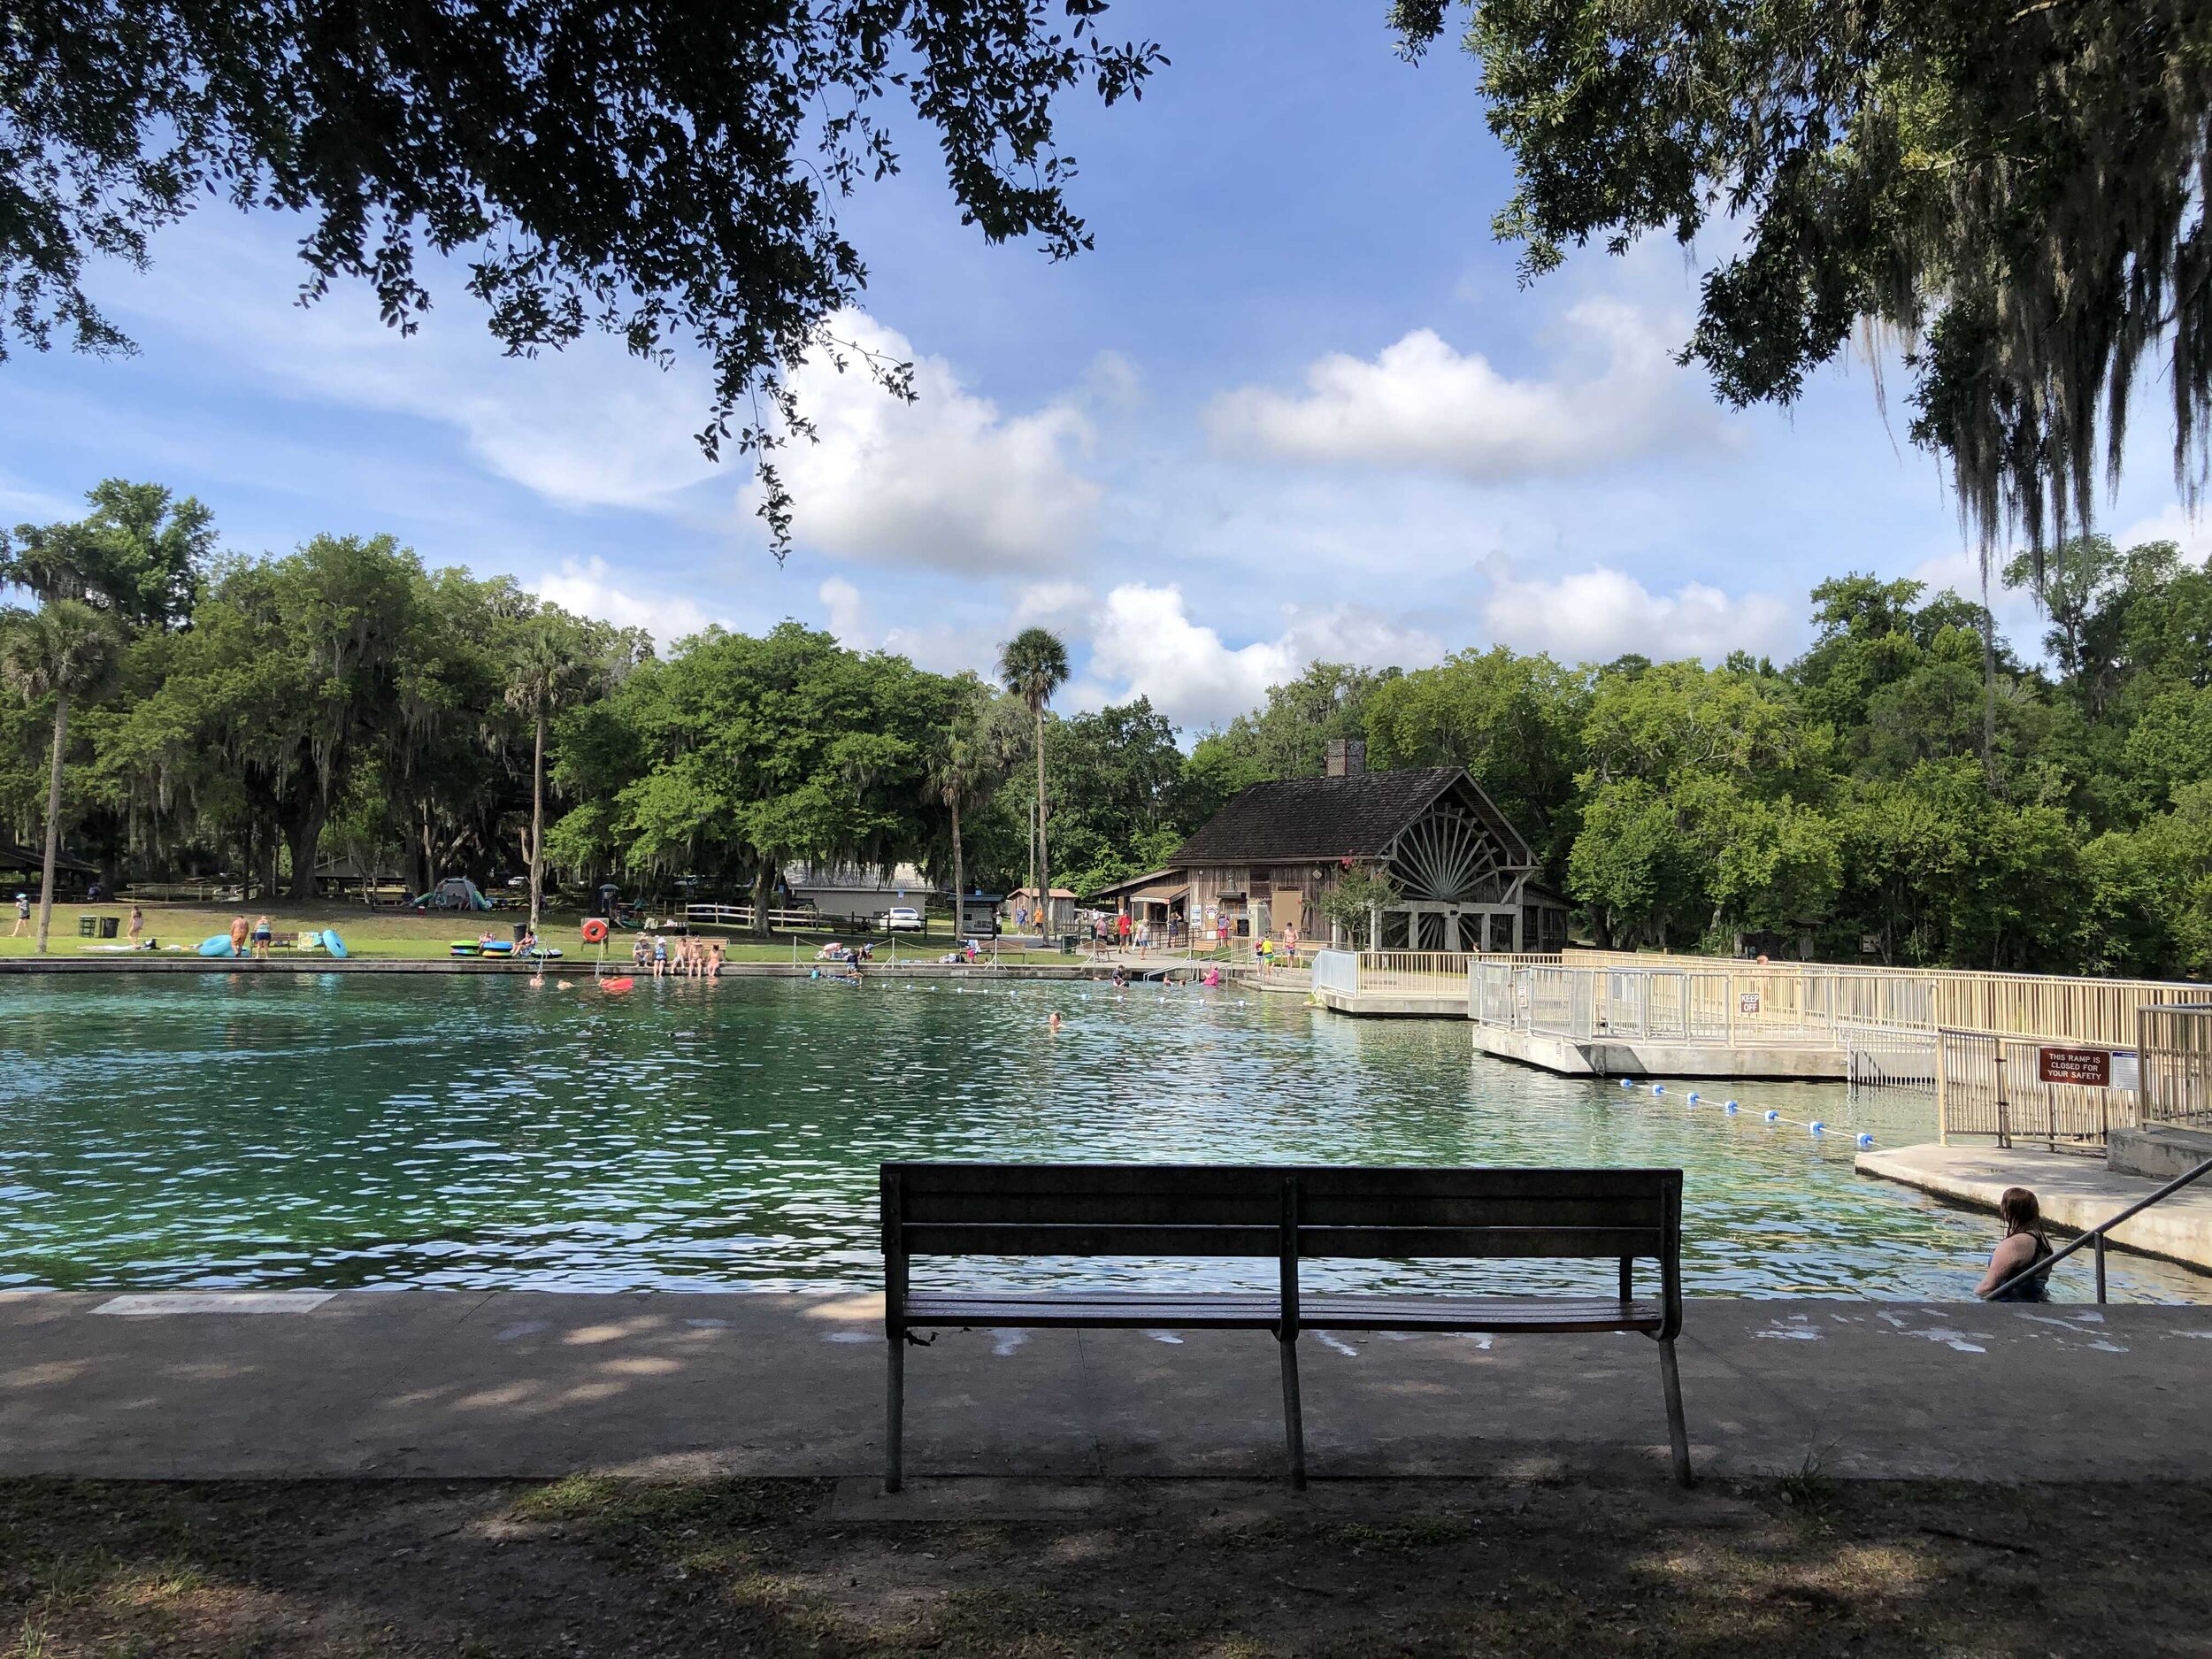  View of the swimming area   (DeLeon Springs State Park)  